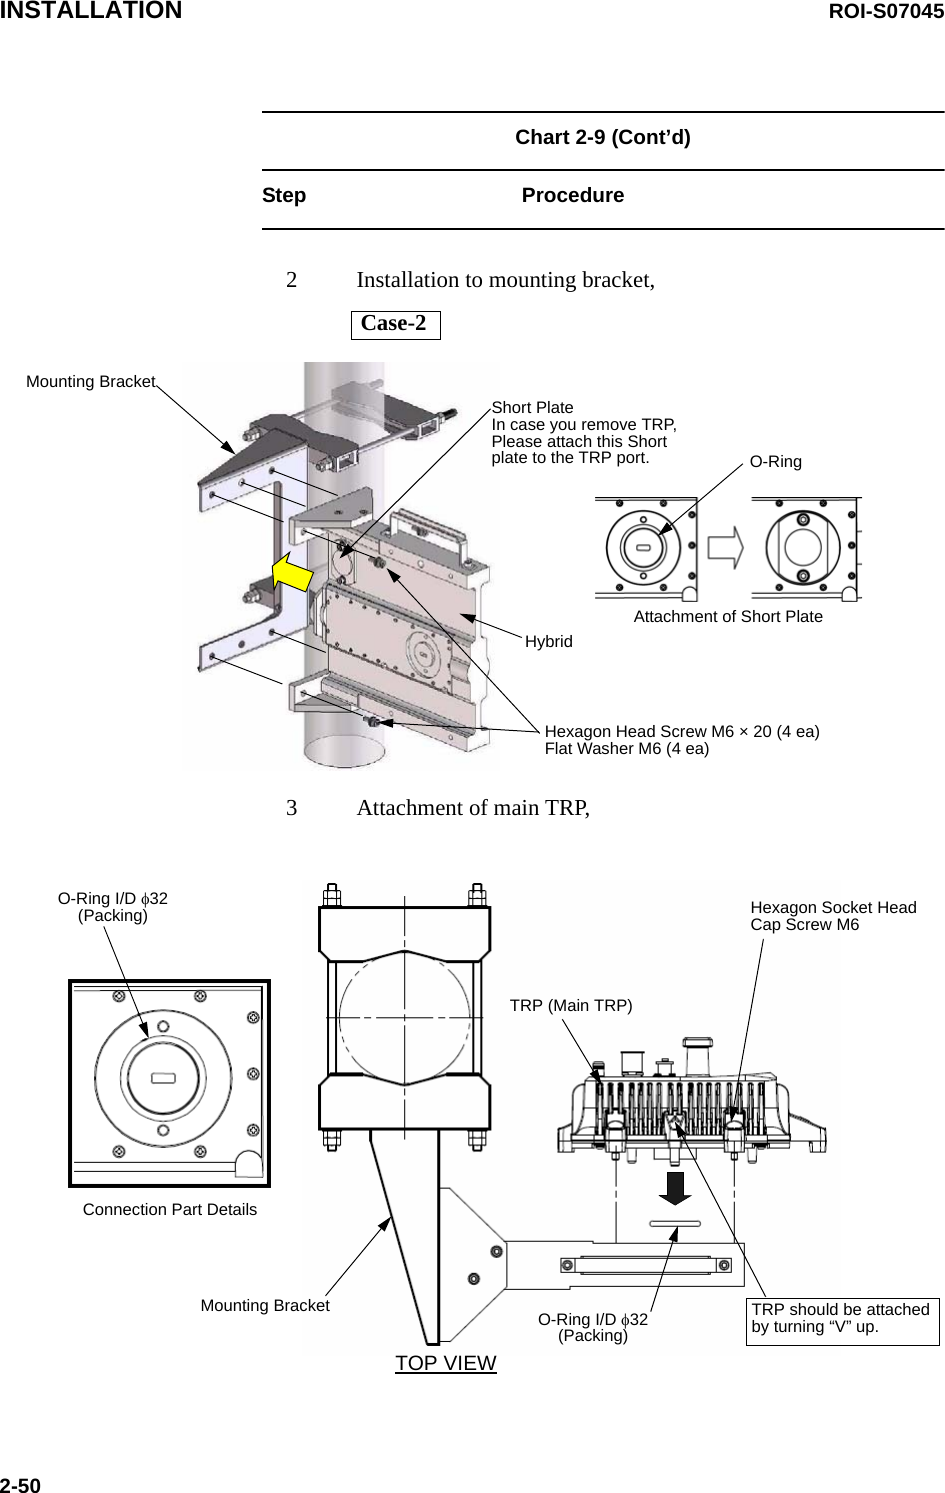 INSTALLATION ROI-S070452-50Chart 2-9 (Cont’d)Step Procedure2 Installation to mounting bracket,3 Attachment of main TRP,Case-2Mounting BracketShort PlateIn case you remove TRP, Please attach this Short plate to the TRP port. O-RingAttachment of Short PlateHybridHexagon Head Screw M6 × 20 (4 ea)Flat Washer M6 (4 ea)Mounting BracketO-Ring I/D φ32(Packing)Connection Part DetailsTRP (Main TRP)Hexagon Socket HeadCap Screw M6O-Ring I/D φ32(Packing)TRP should be attached by turning “V” up.TOP VIEW